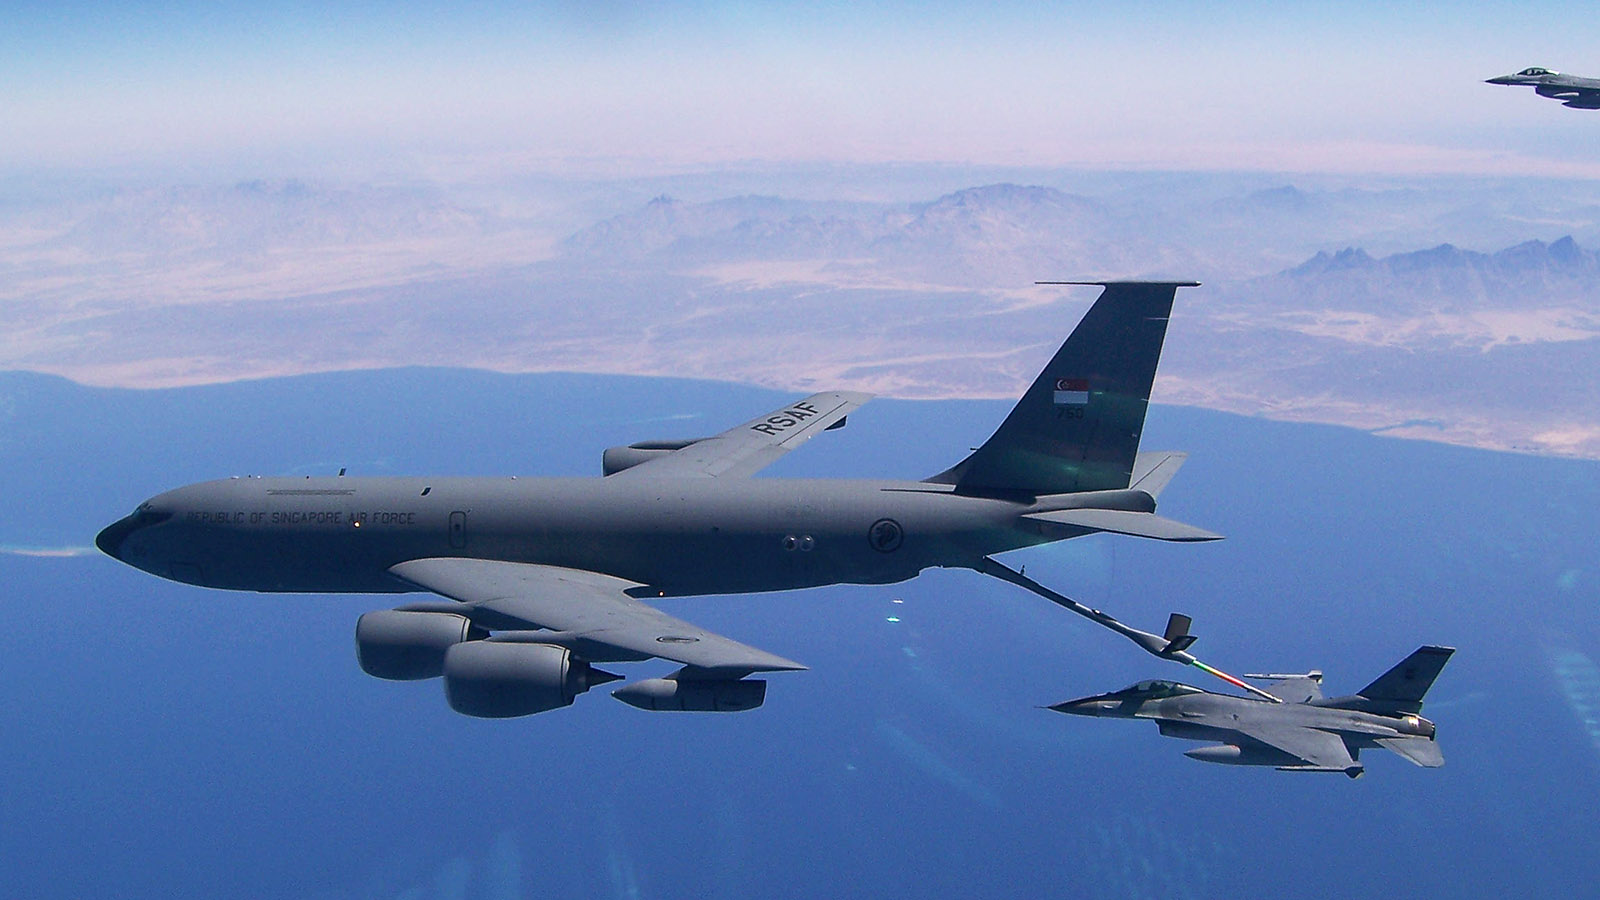 The KC-135Rs conducted some of the longest deployments of our fighters around the globe.